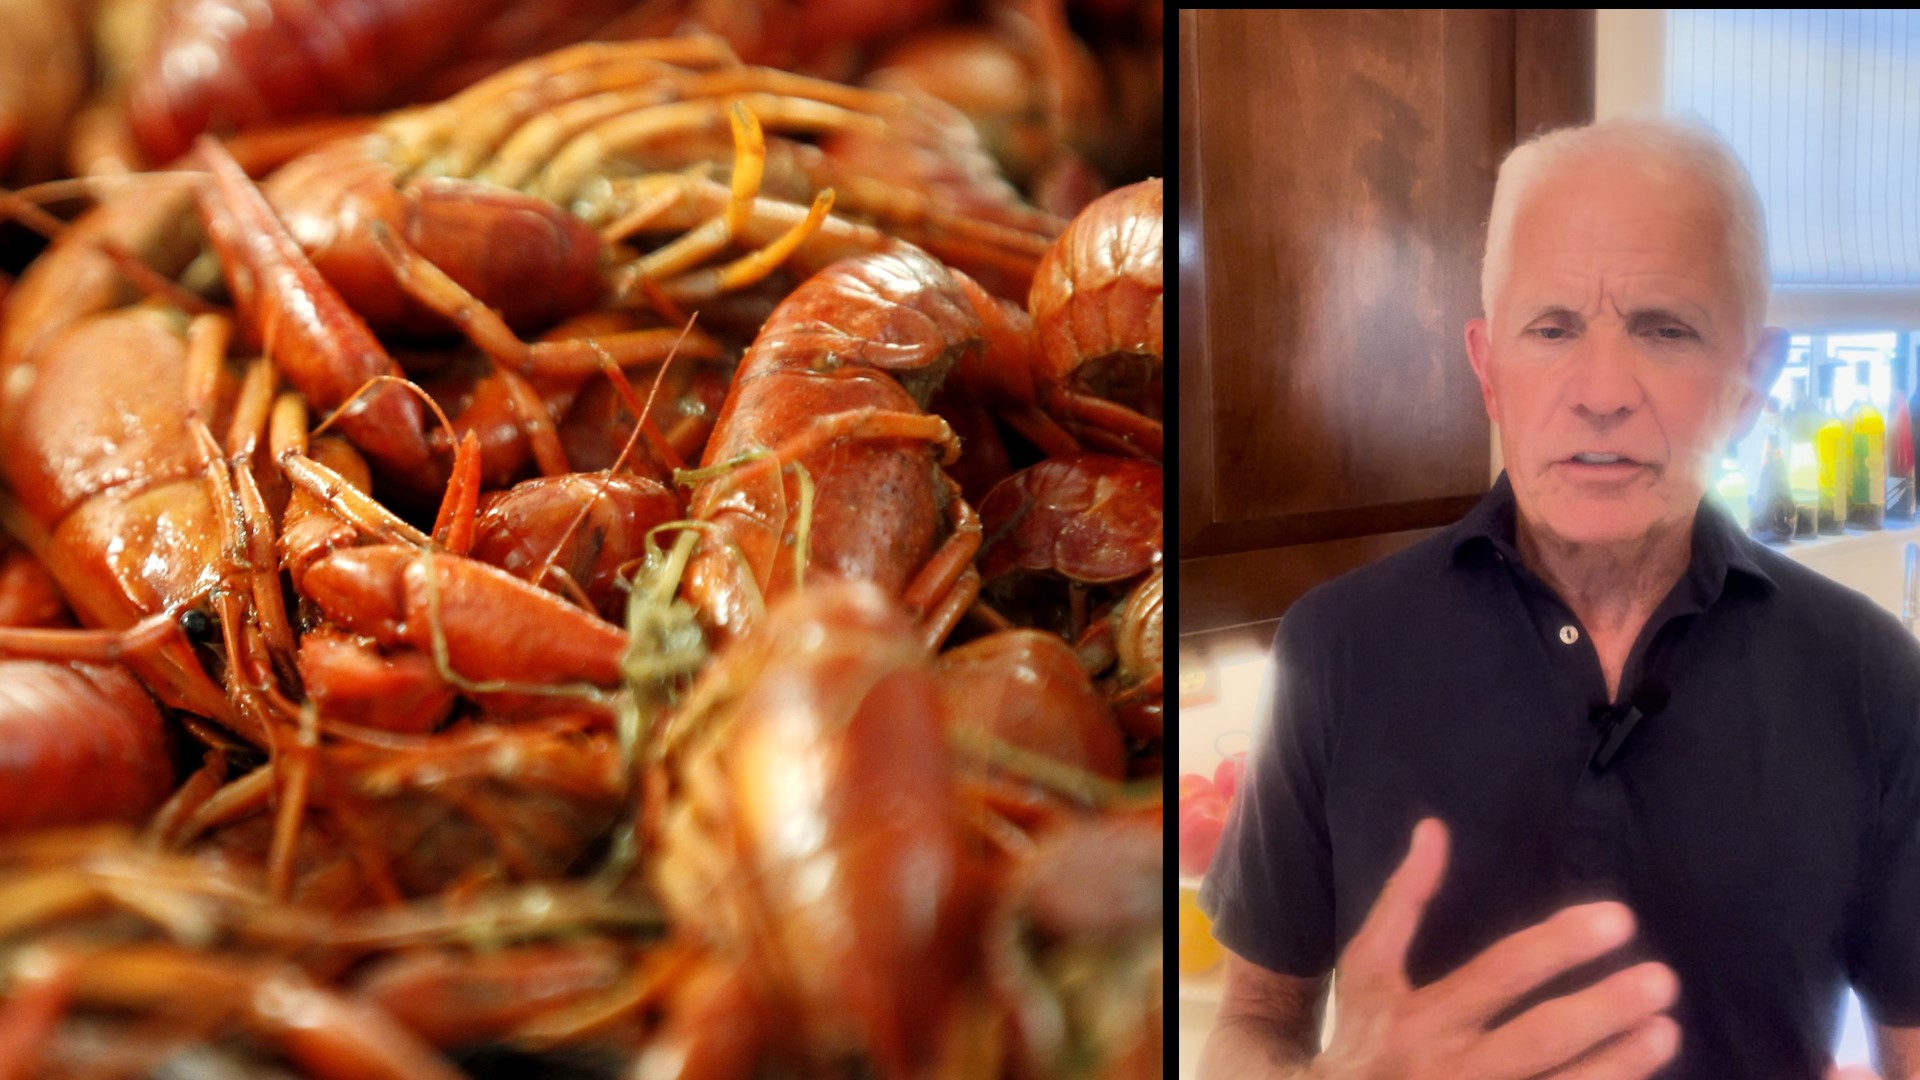 WWL Louisiana Health & Fitness expert Mackie Shilstone discusses the nutritional benefits of crawfish as claimed by the Louisiana Department of Health.